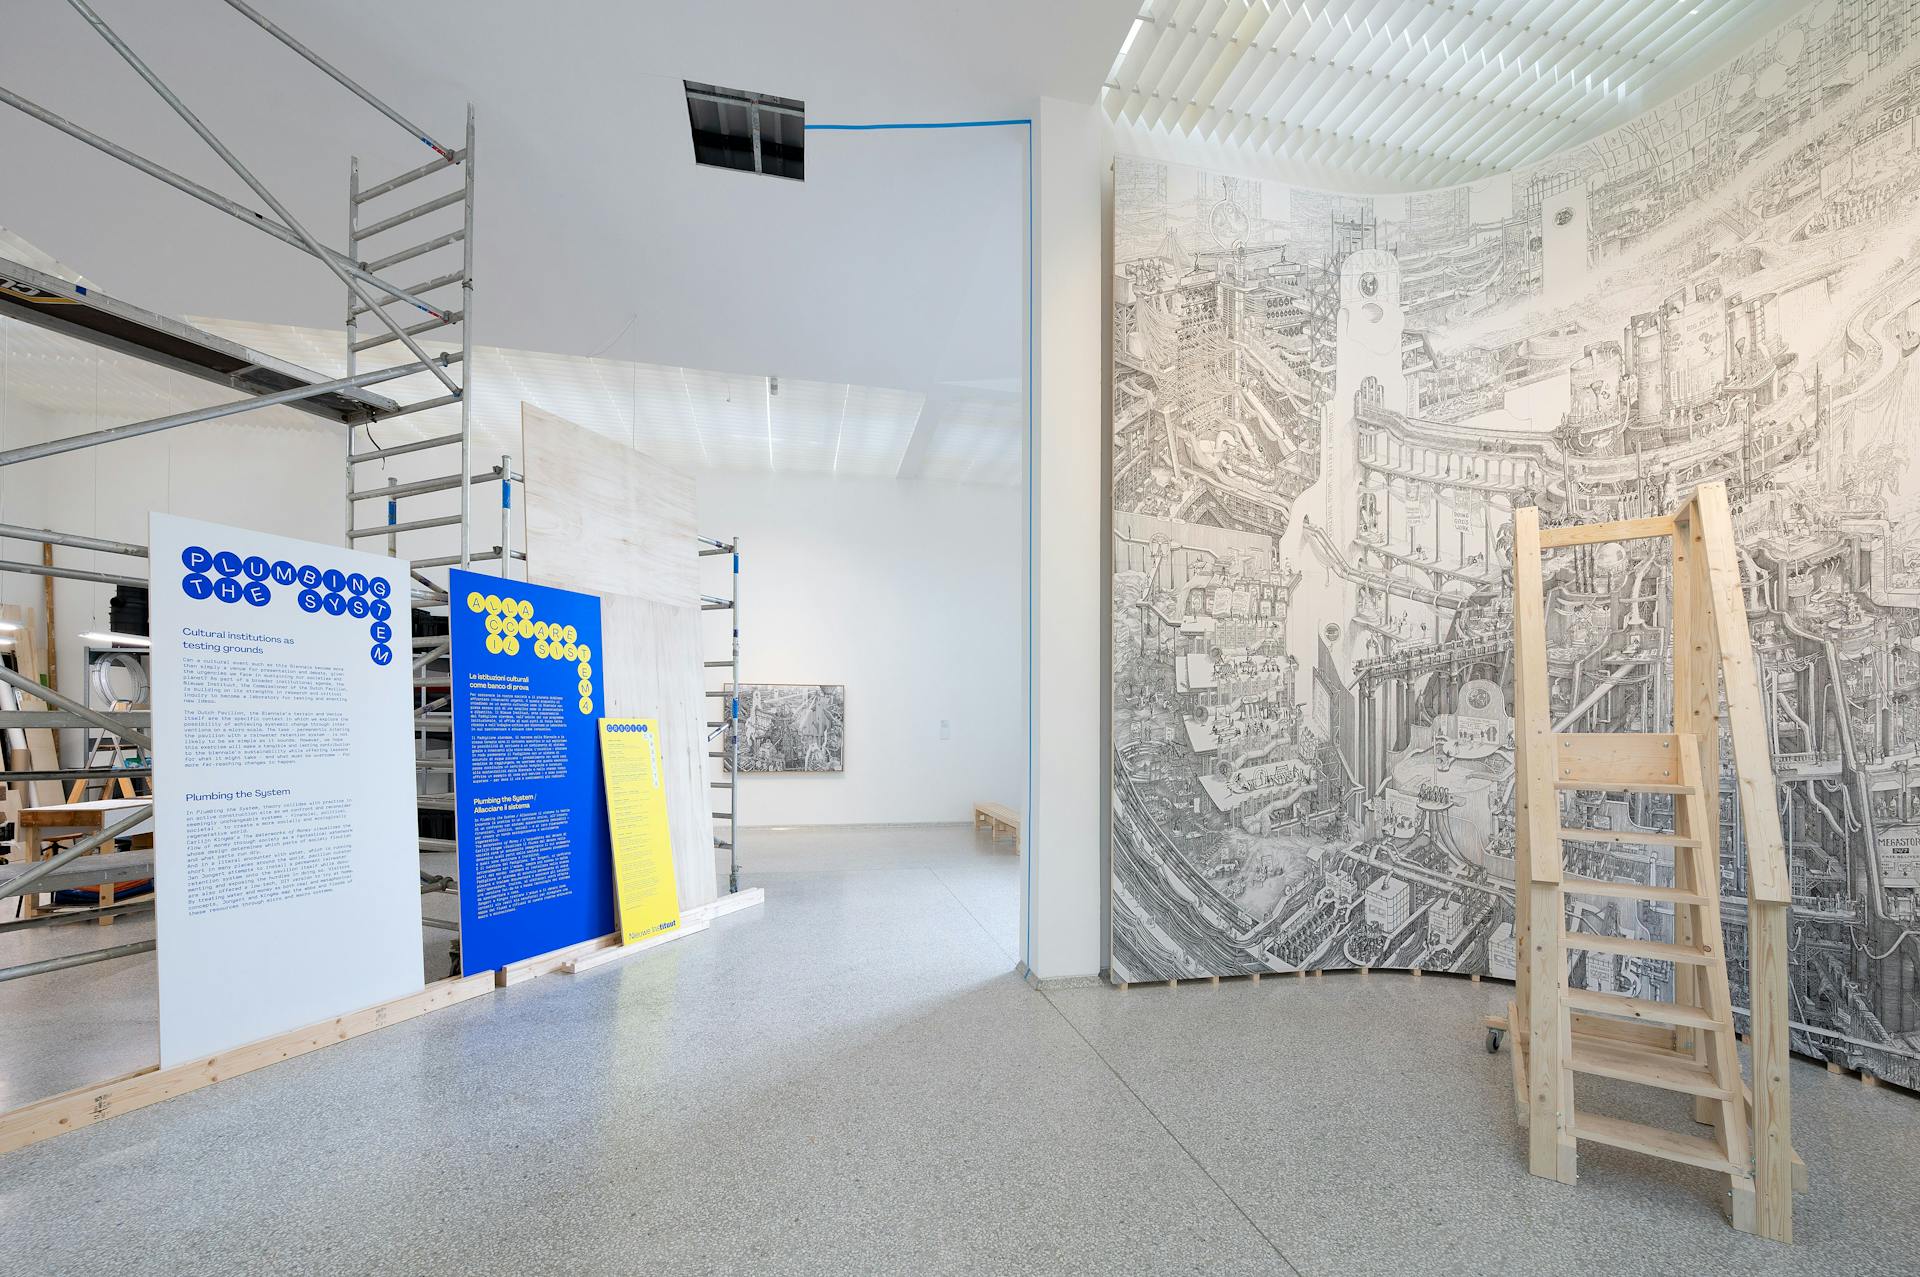 Image of an exhibition space. On the left a scaffold with room texts in graphic design, on the right a detailed drawing as high as the wall, with a staircase for closer viewing.